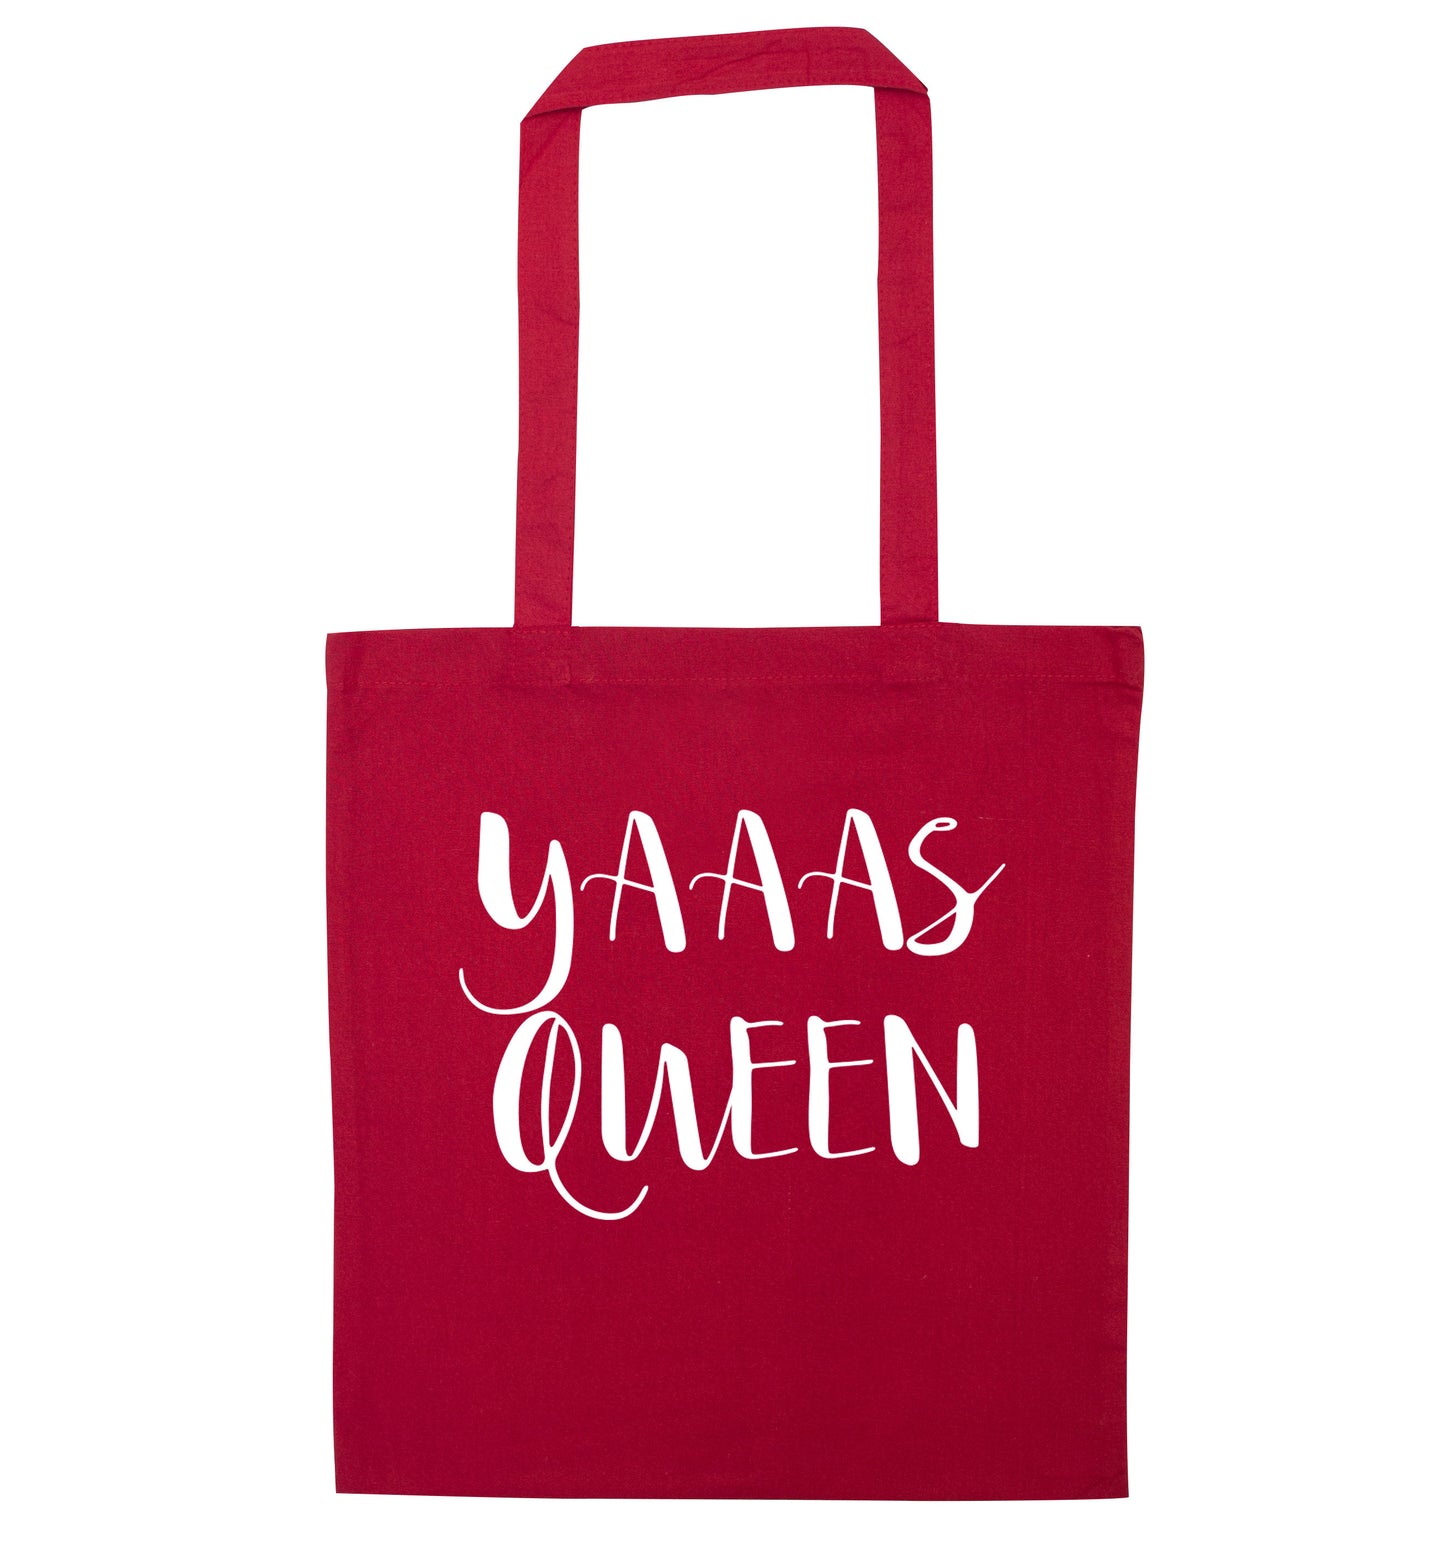 Yas Queen red tote bag